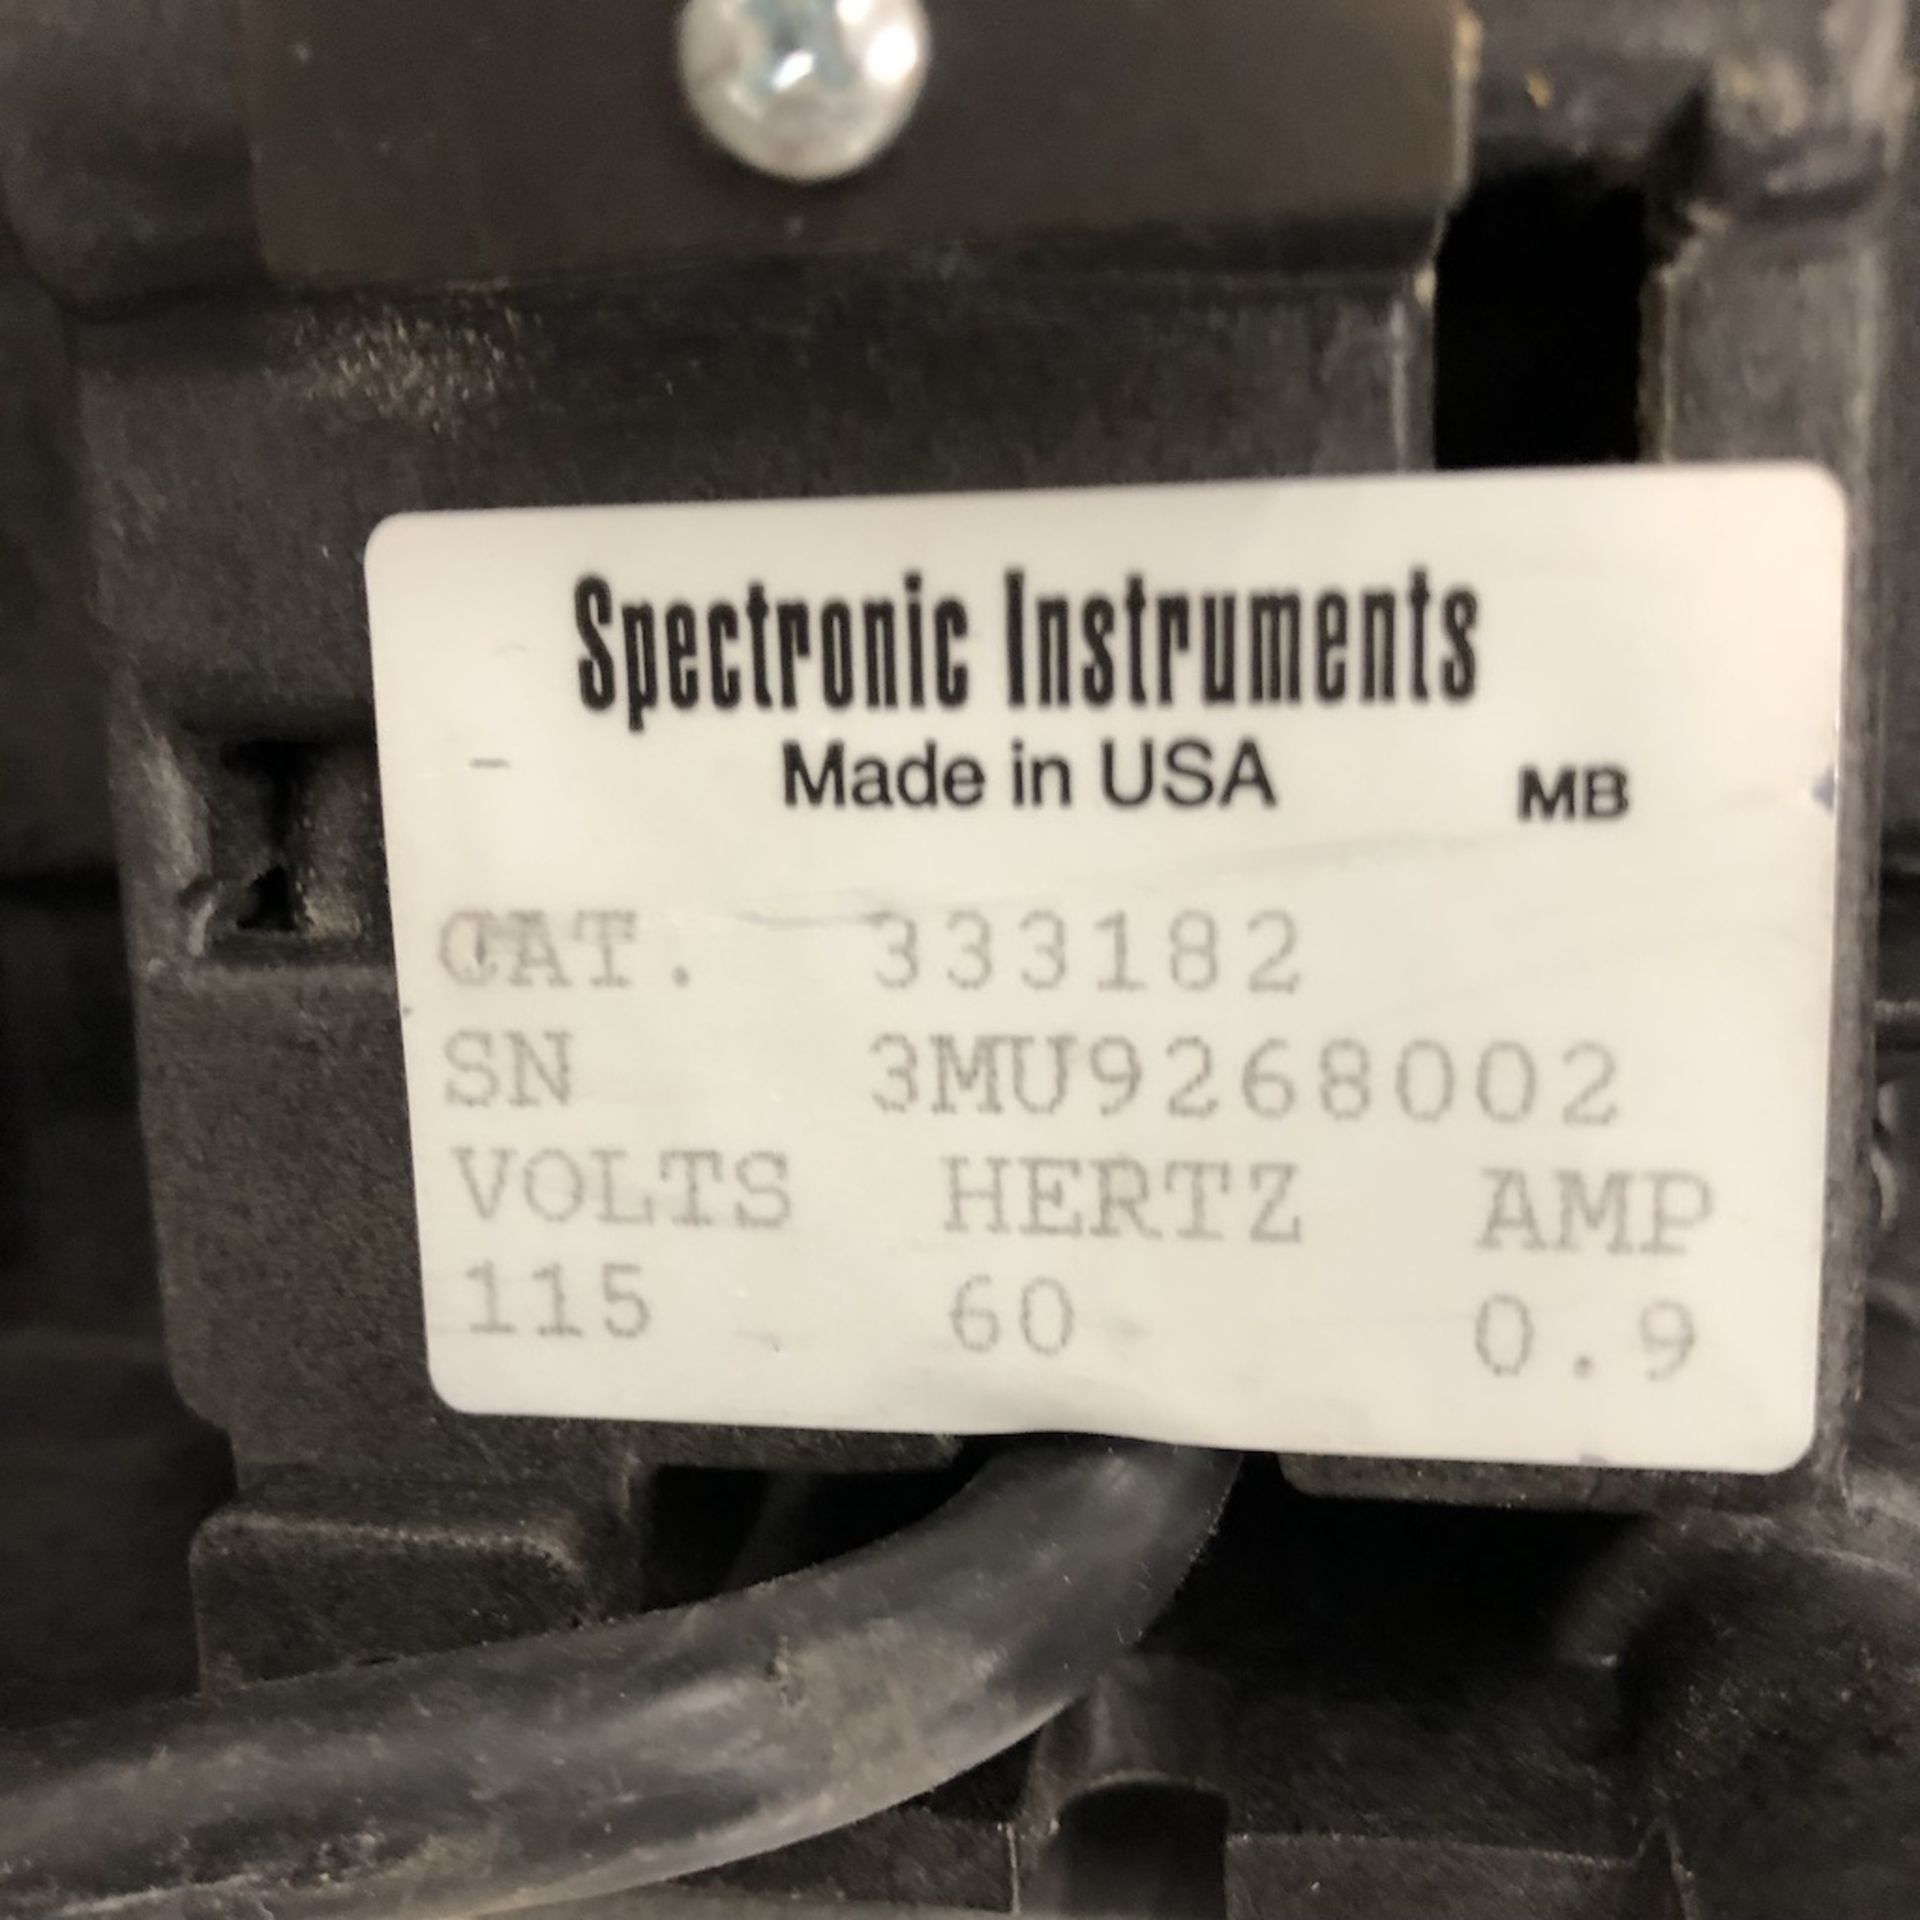 SPECTRONIC INSTRUMENTS 333182 SPECTRONIC 20+ SPECTROMETER - Image 7 of 7